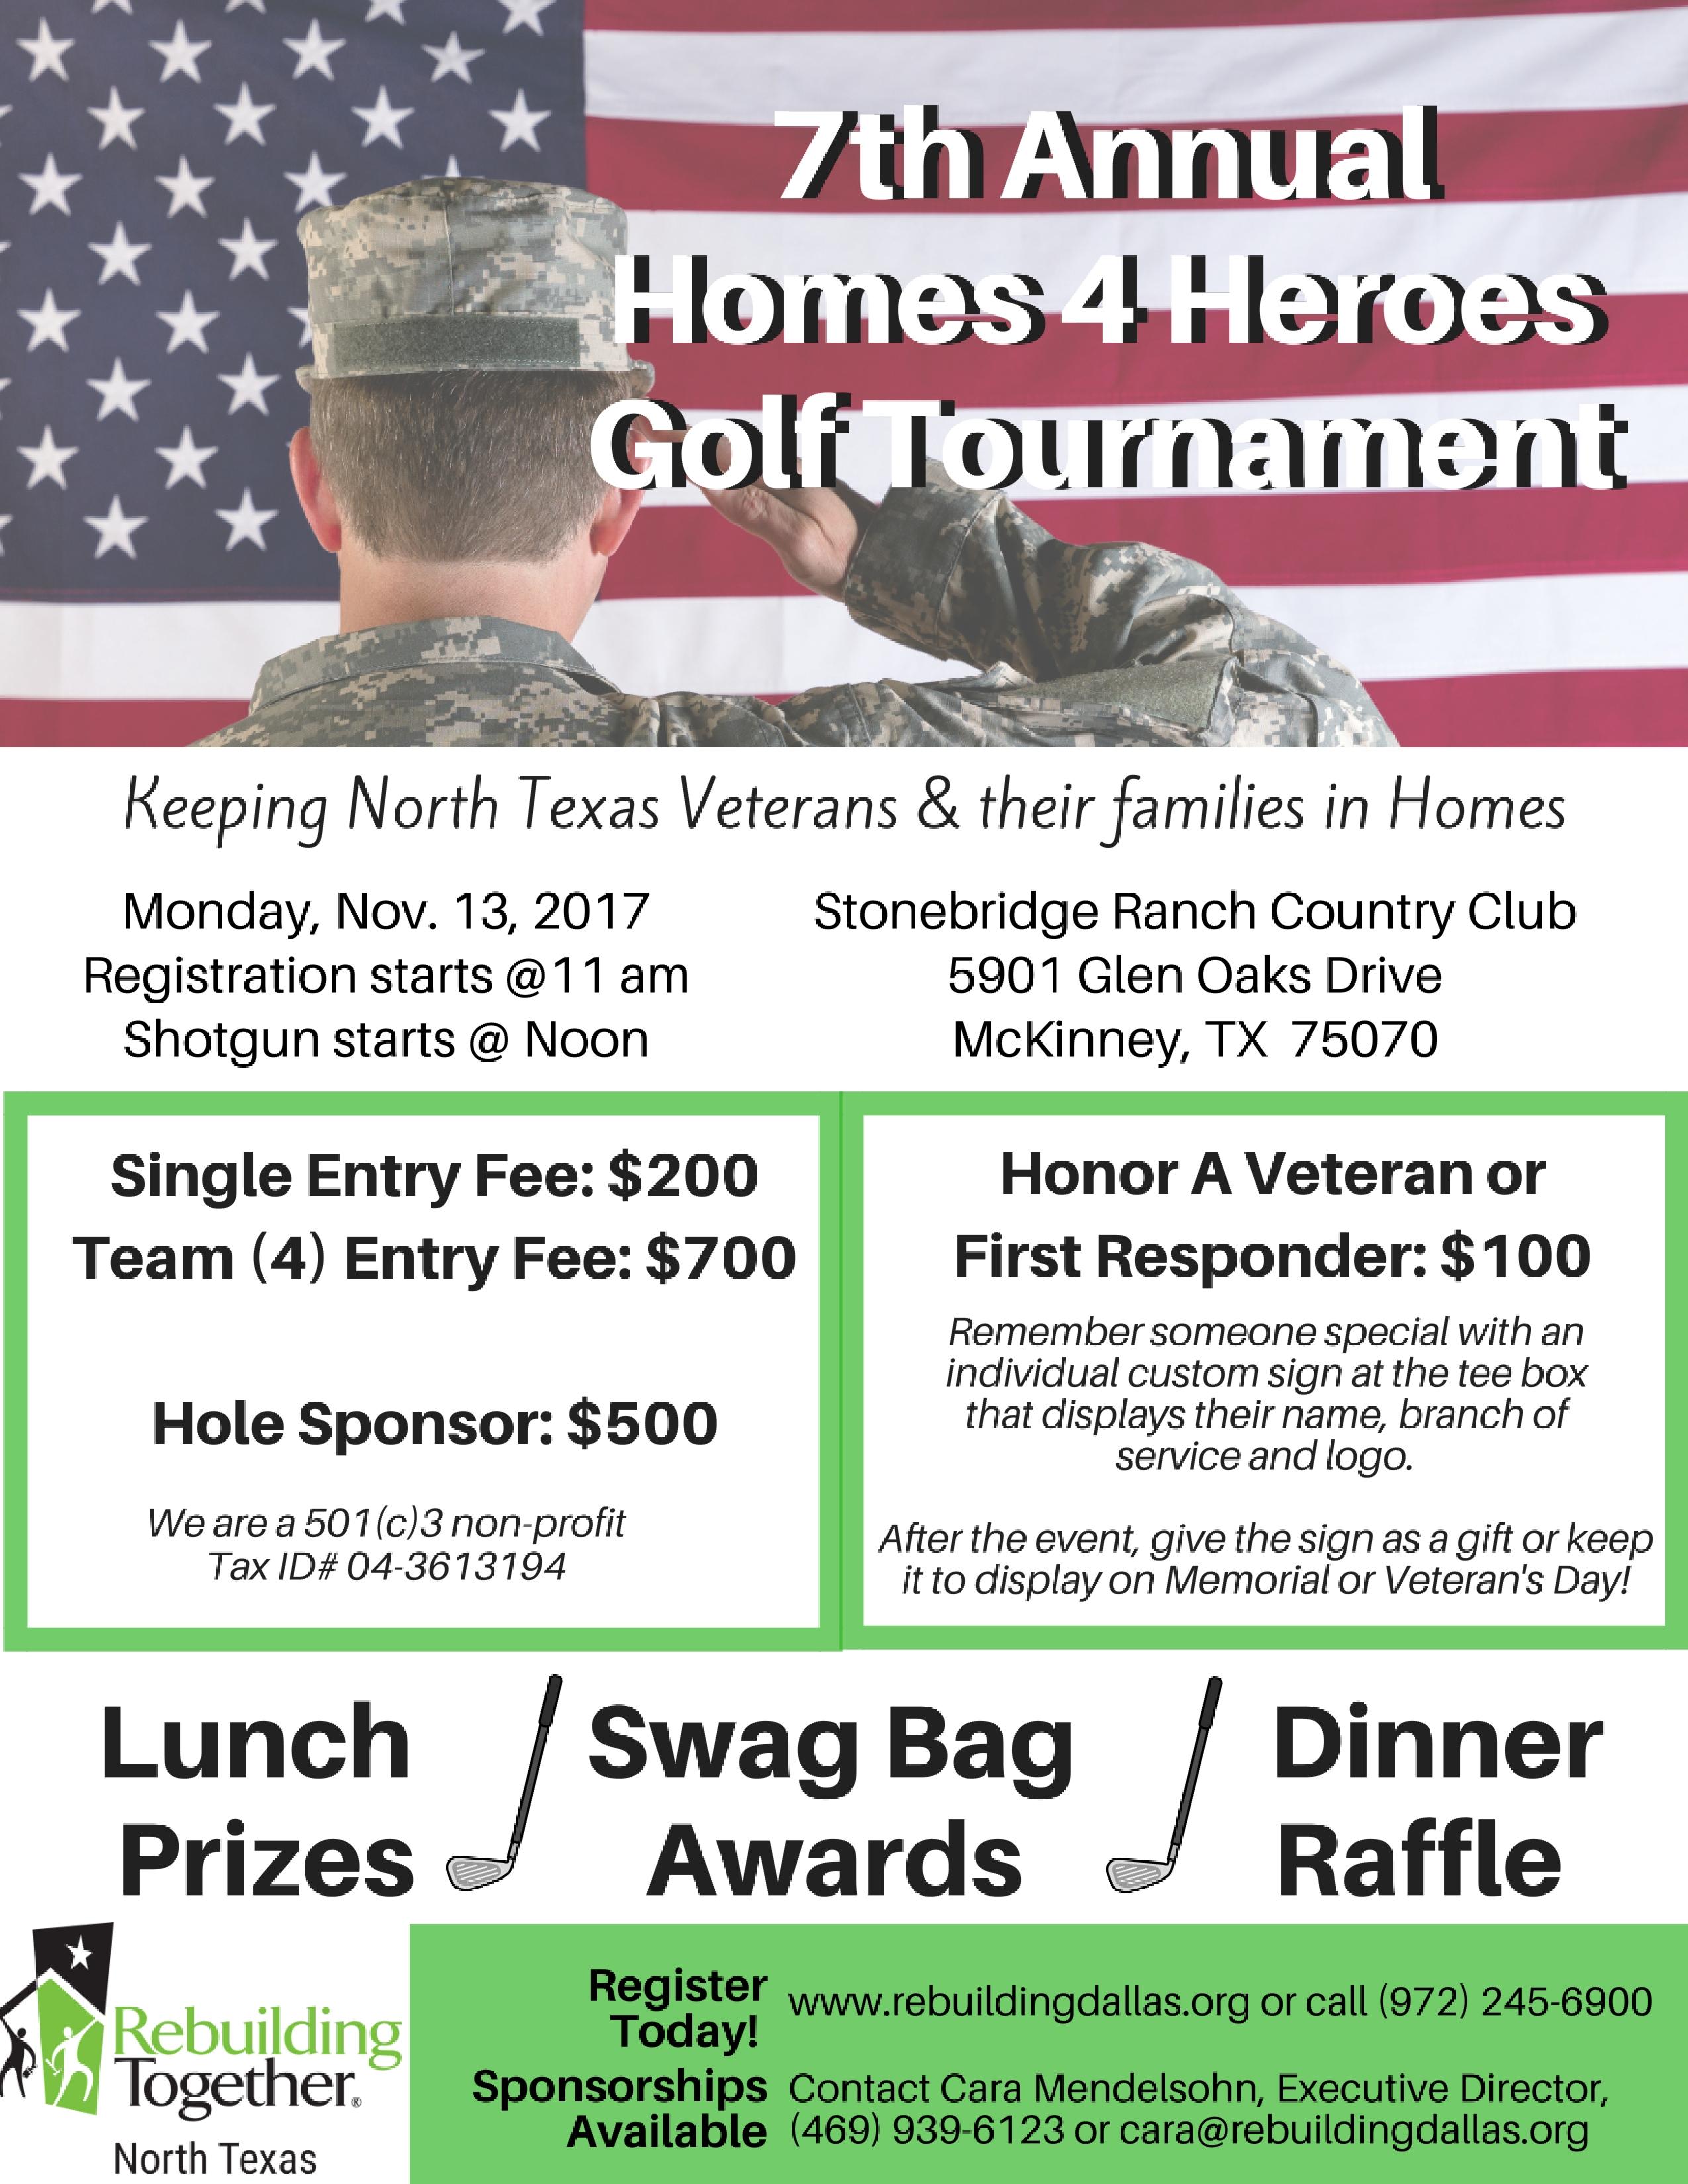 7th Annual Homes 4 Heroes Golf Tournament